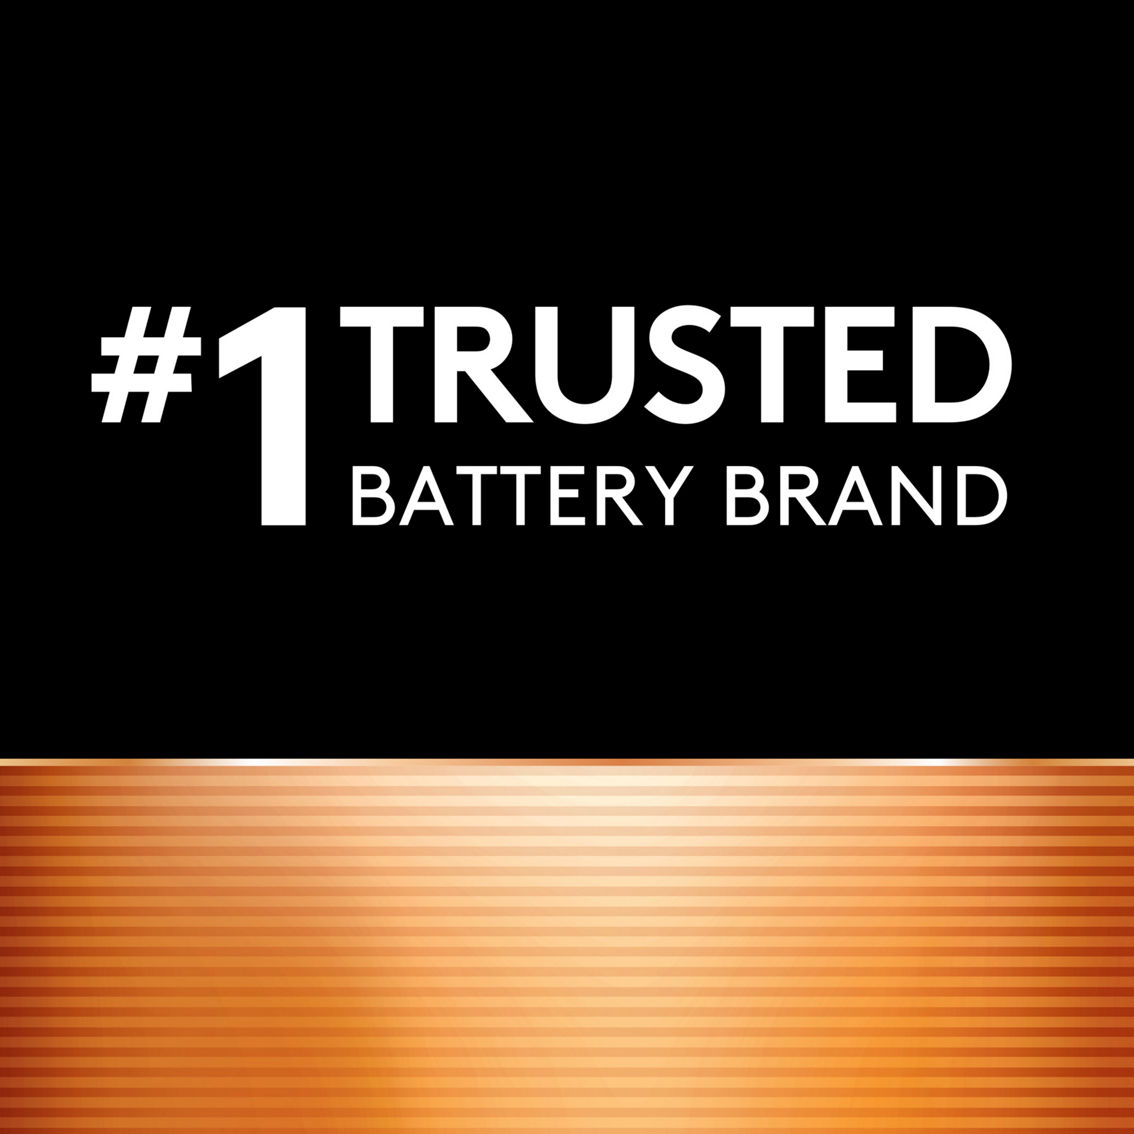 Duracell AAA Batteries 16 ct. - Image 5 of 6